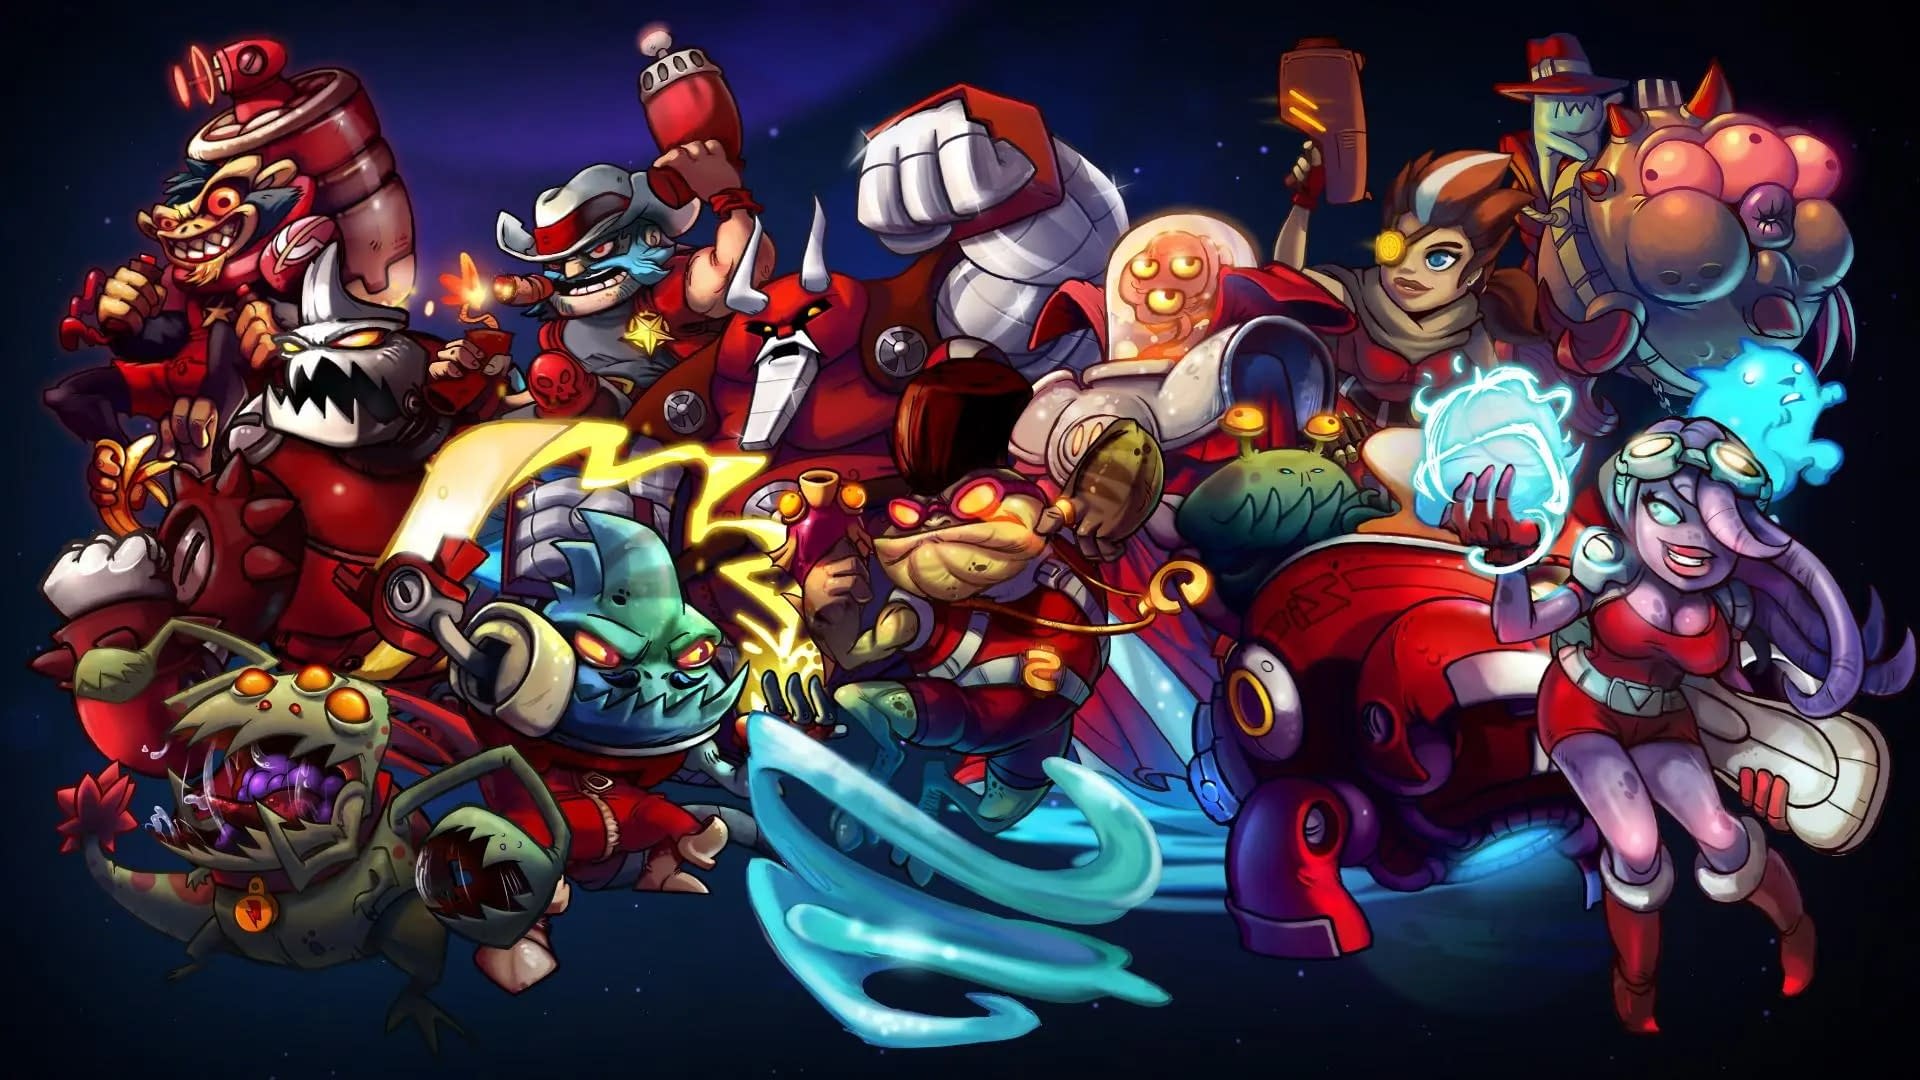 What Achievements Are There in Awesomenauts? How to Win?